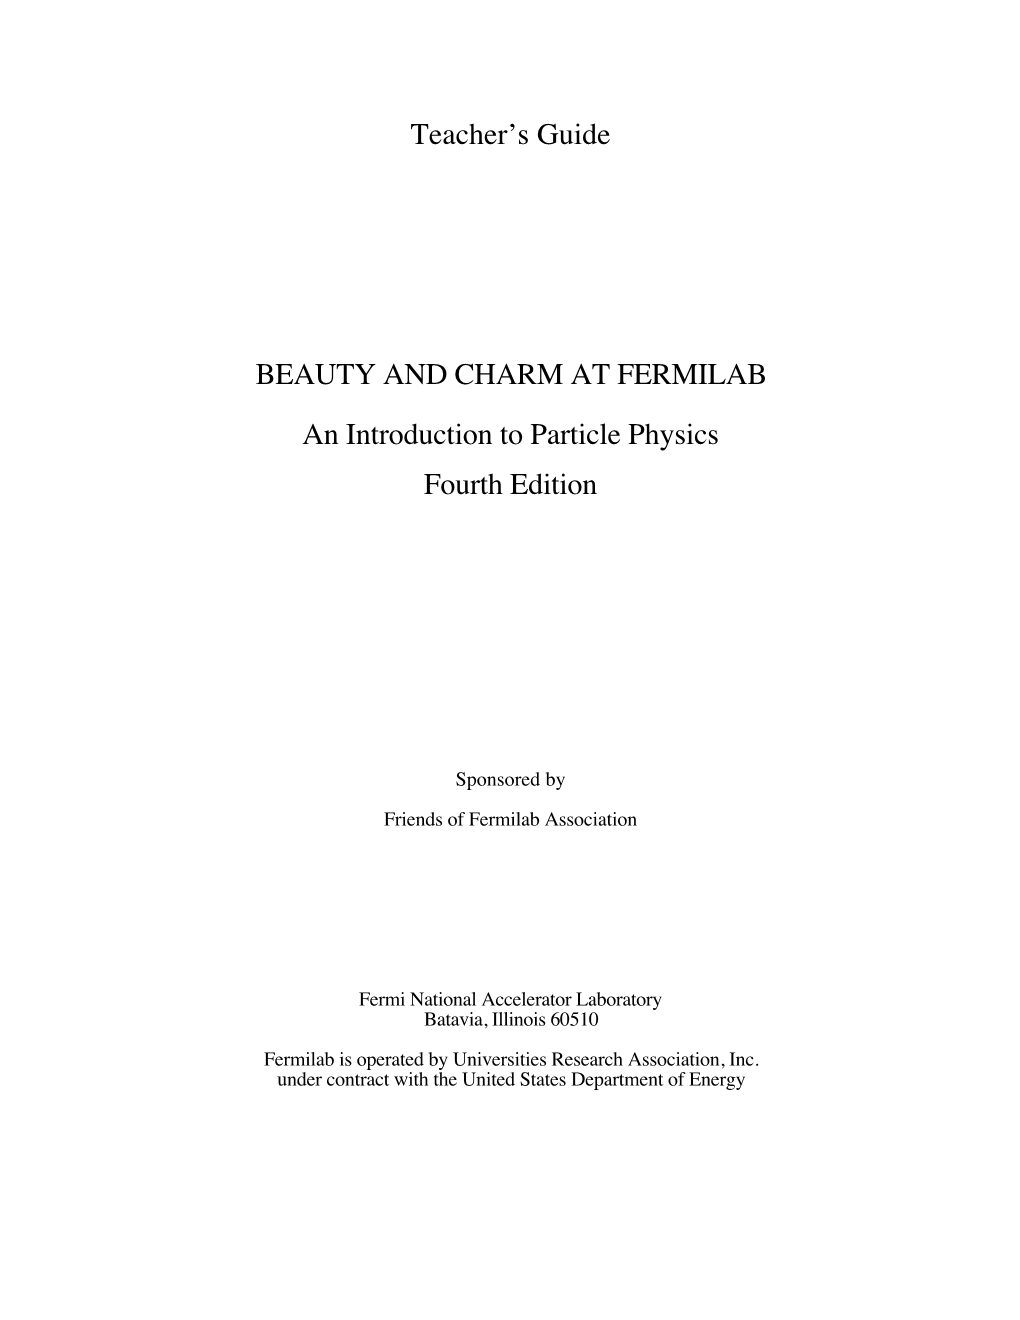 Teacher's Guide BEAUTY and CHARM at FERMILAB an Introduction to Particle Physics Fourth Edition